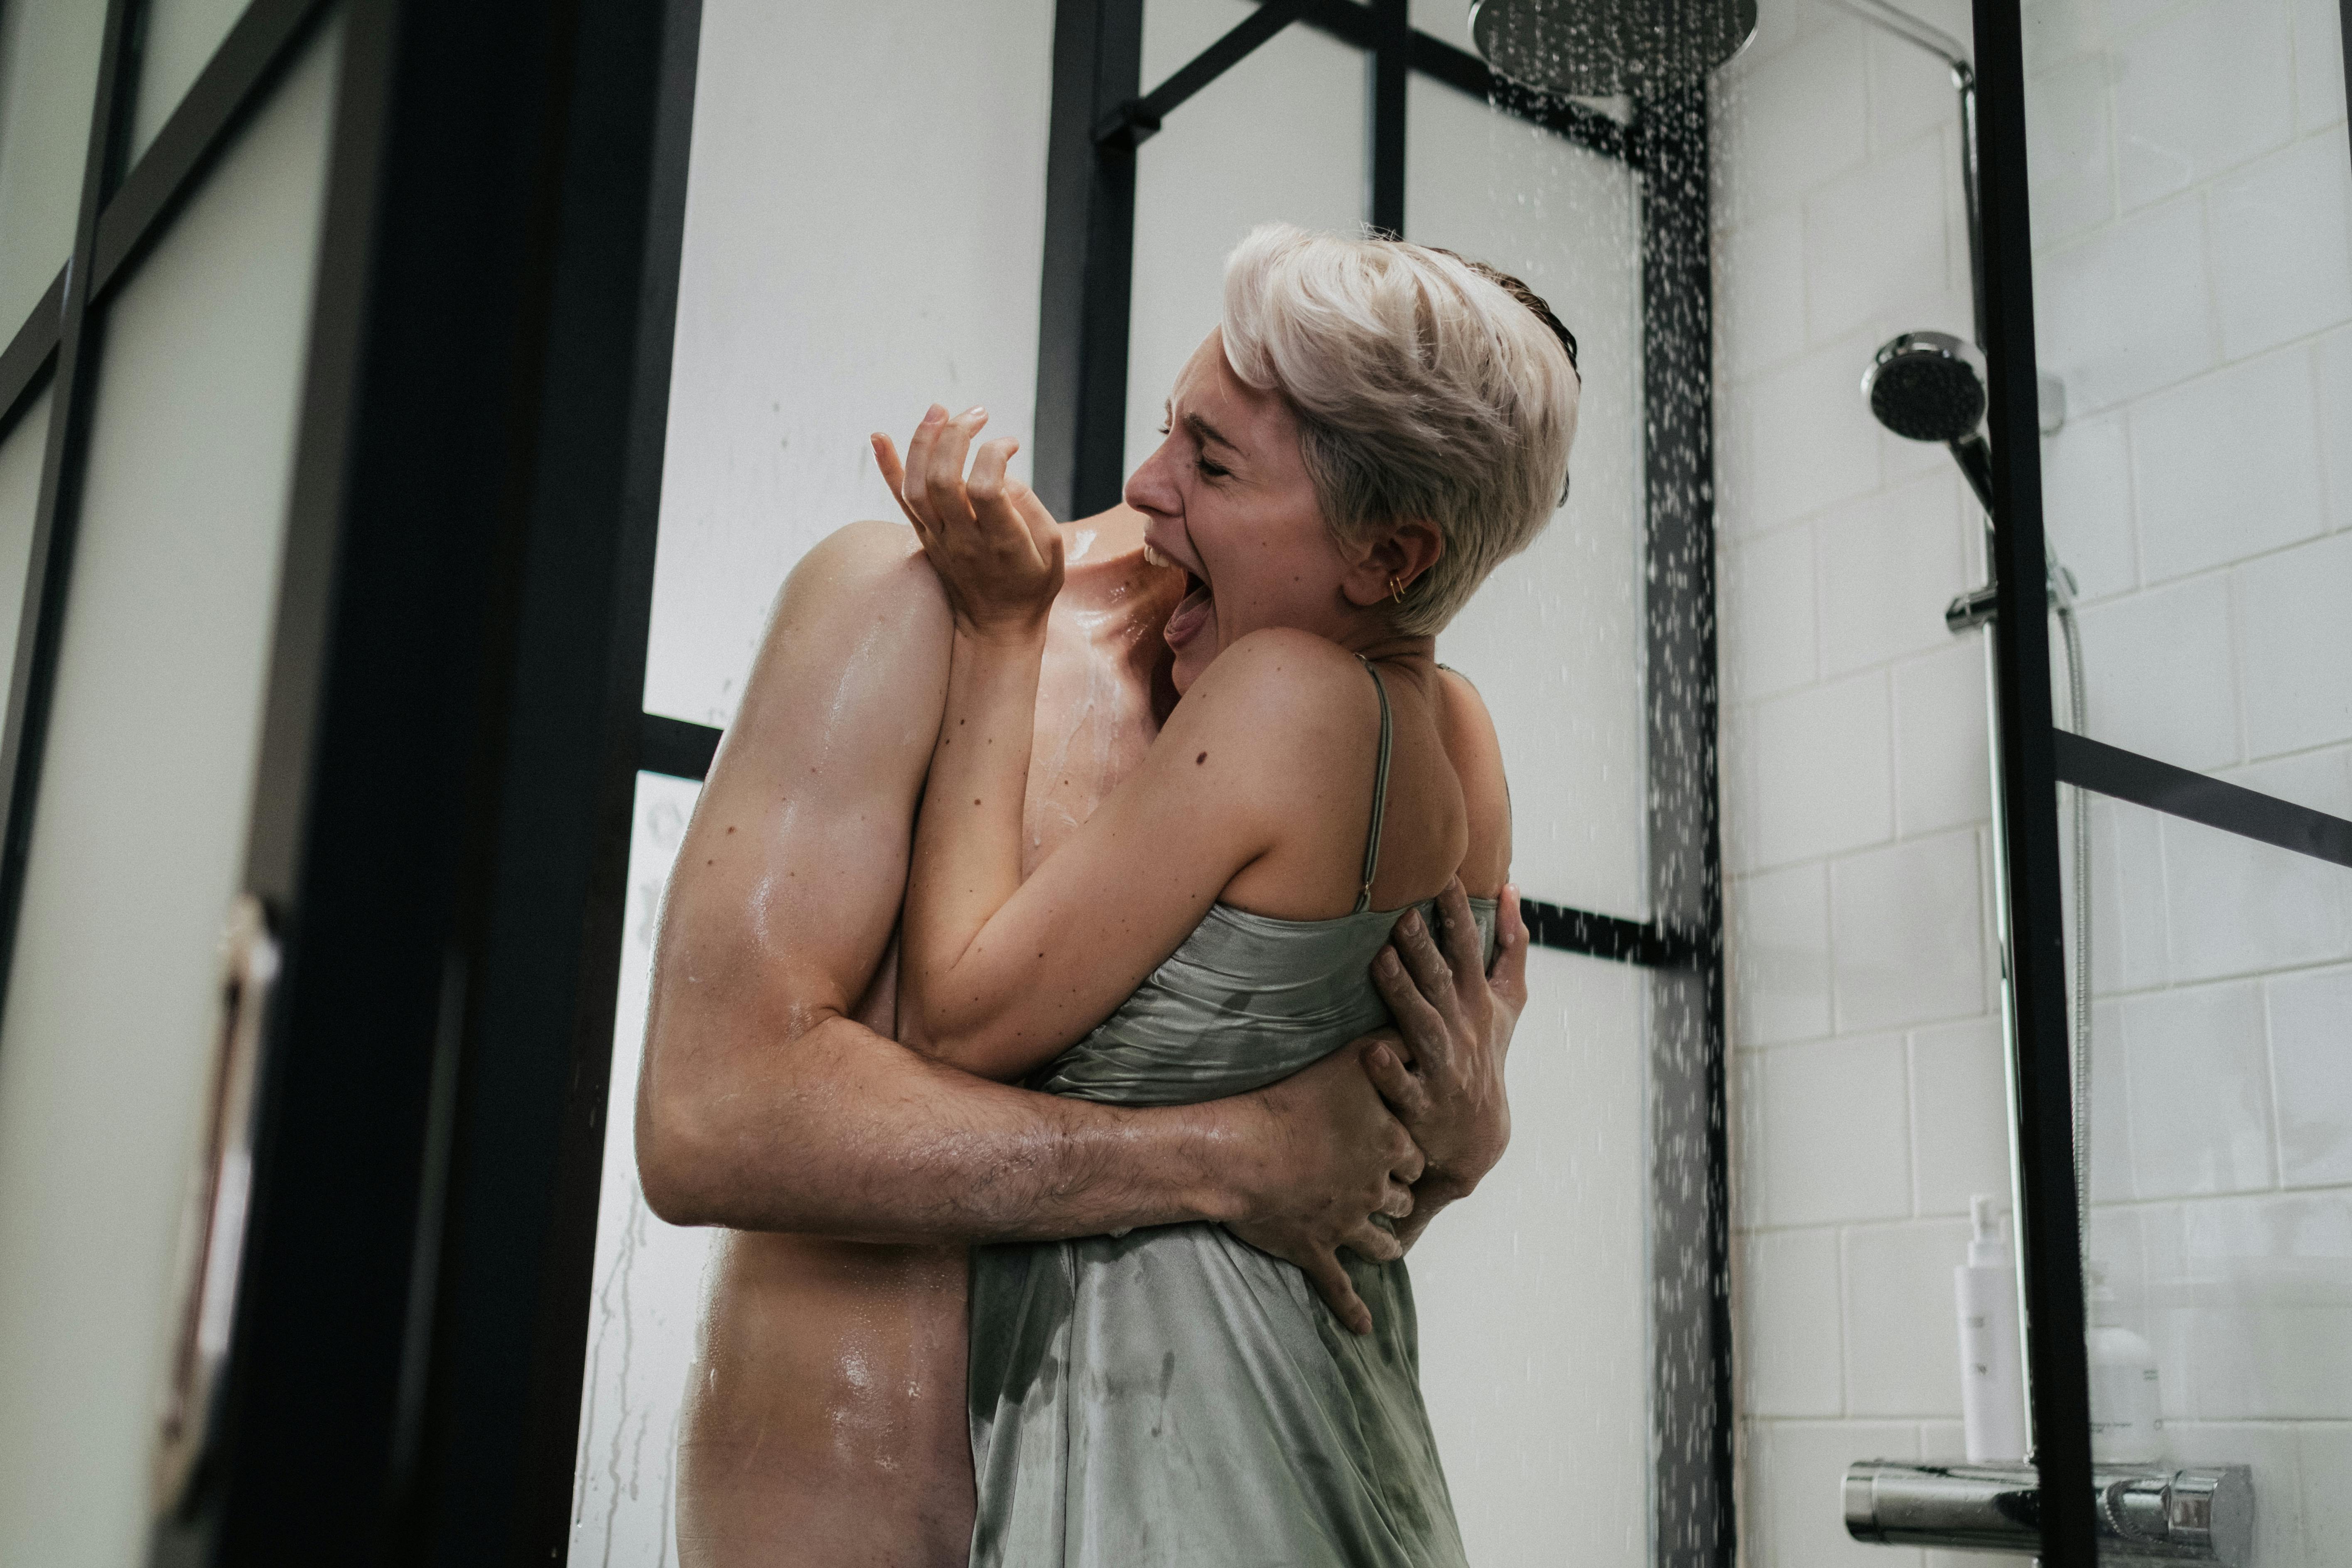 Naked Man Hugging Woman in Green Dress in the Shower · Free Stock Photo image